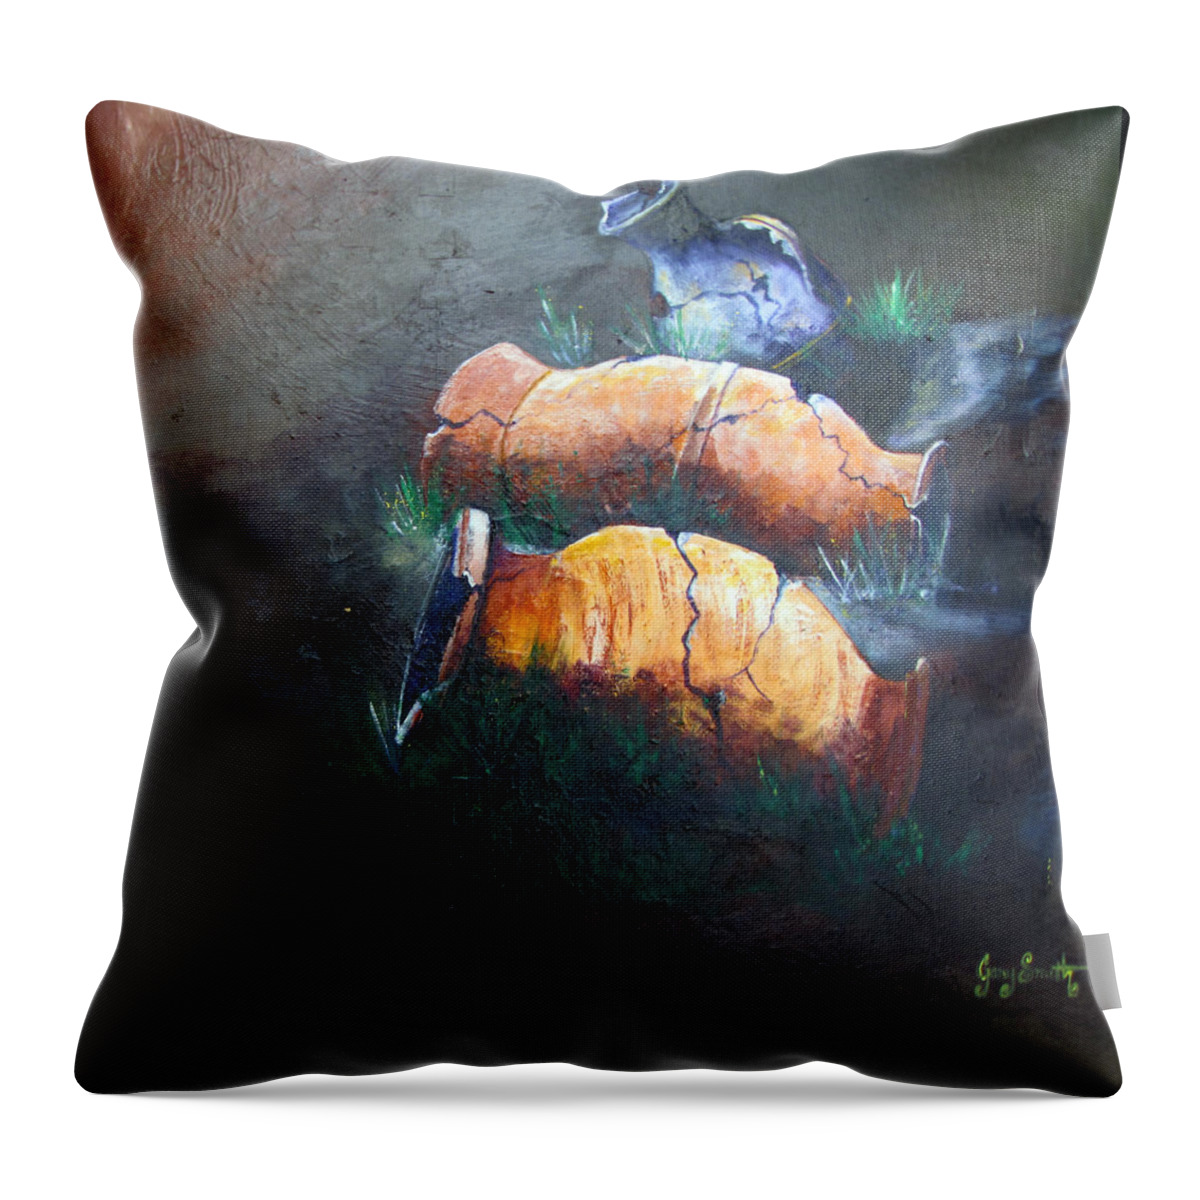 Urns Throw Pillow featuring the painting 3 Cracked Urns by Gary Smith